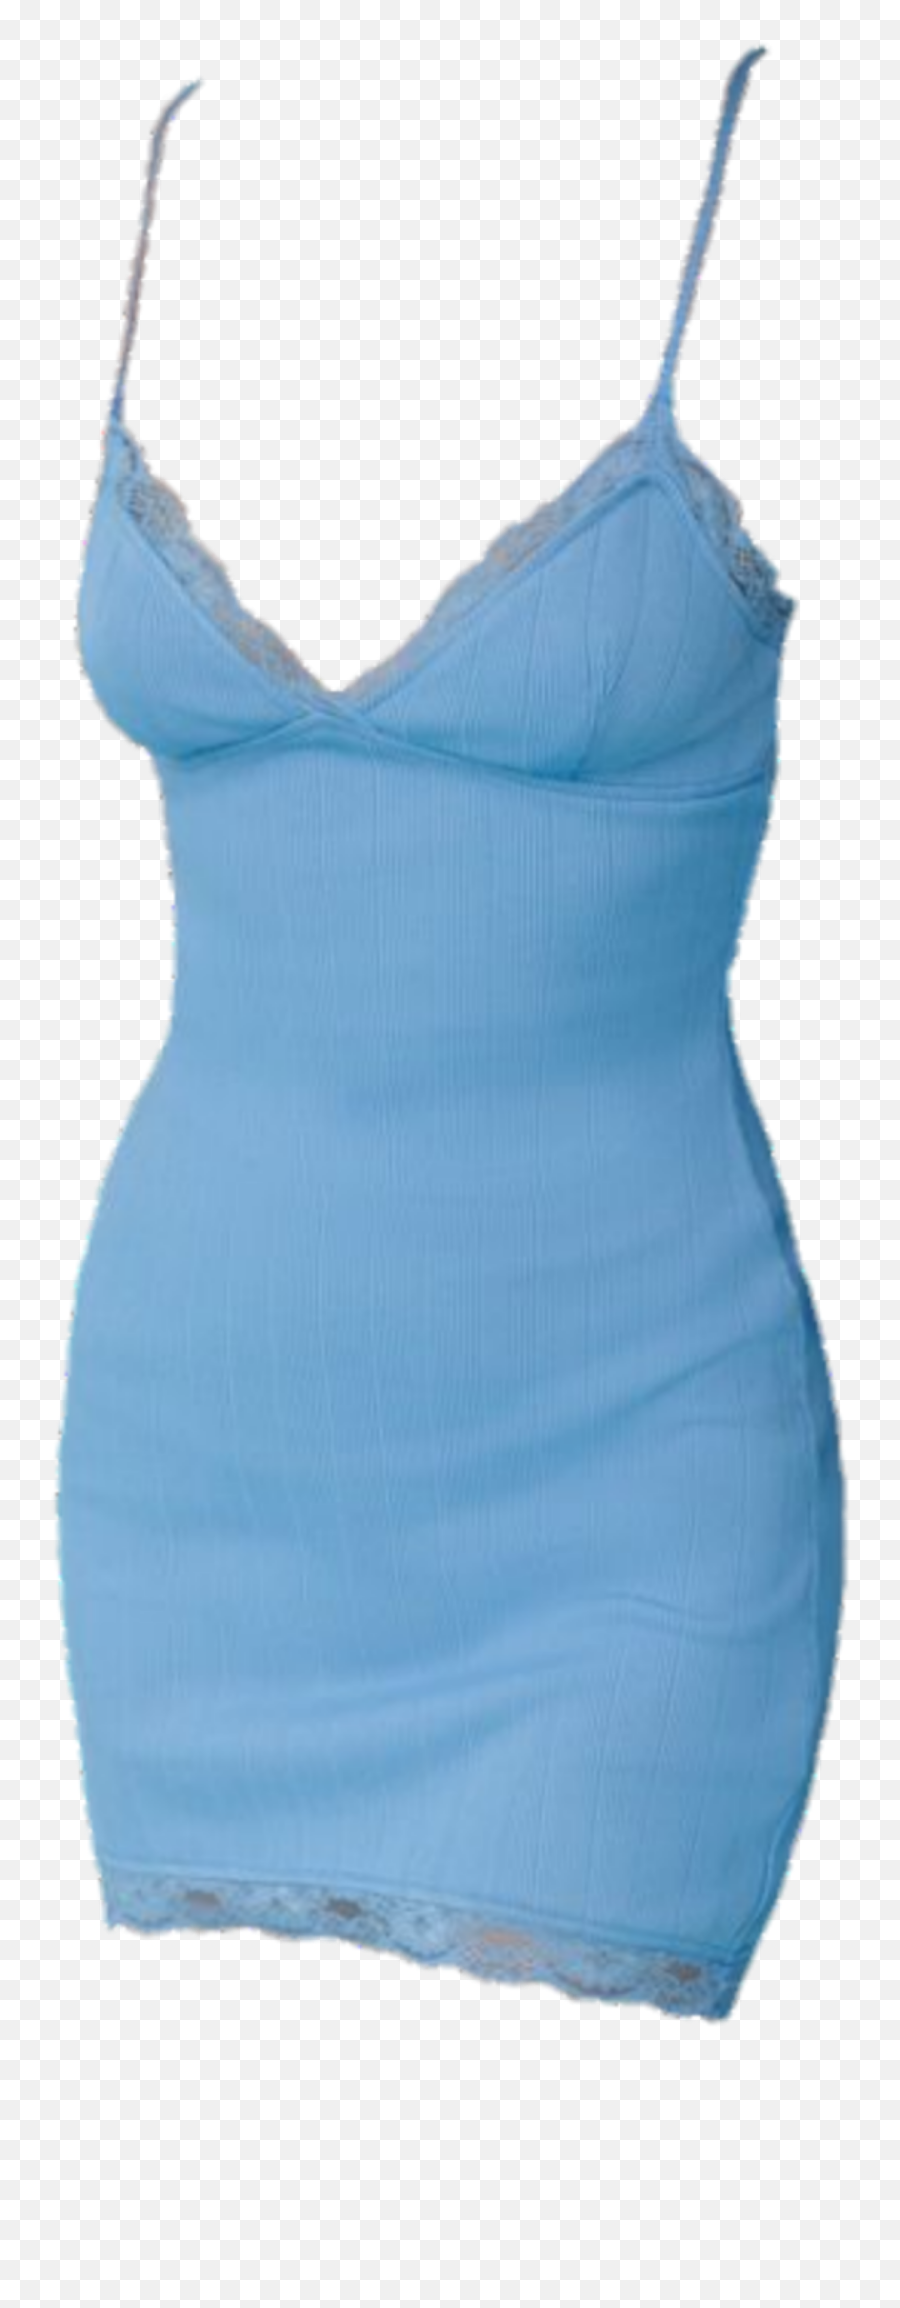 Outfit Aesthetic Blue Dress - Cocktail Dress Emoji,Blue Emoji Outfit